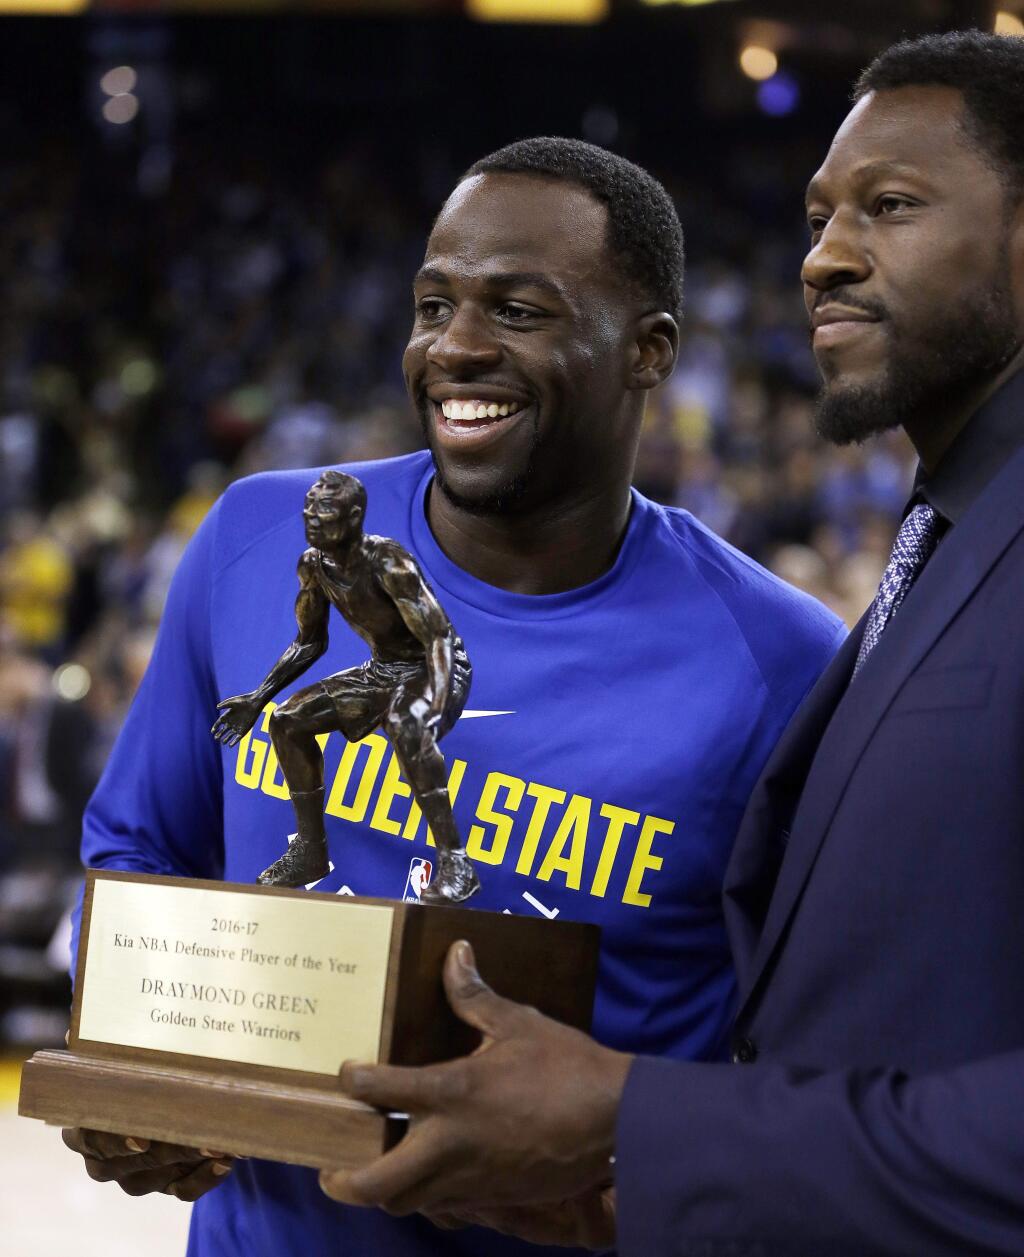 The Golden State Warriors' Draymond Green, left, receives the NBA defensive player of the year award from Ben Wallace prior to a a preseason game against the Denver Nuggets Saturday, Sept. 30, 2017, in Oakland. (AP Photo/Ben Margot)